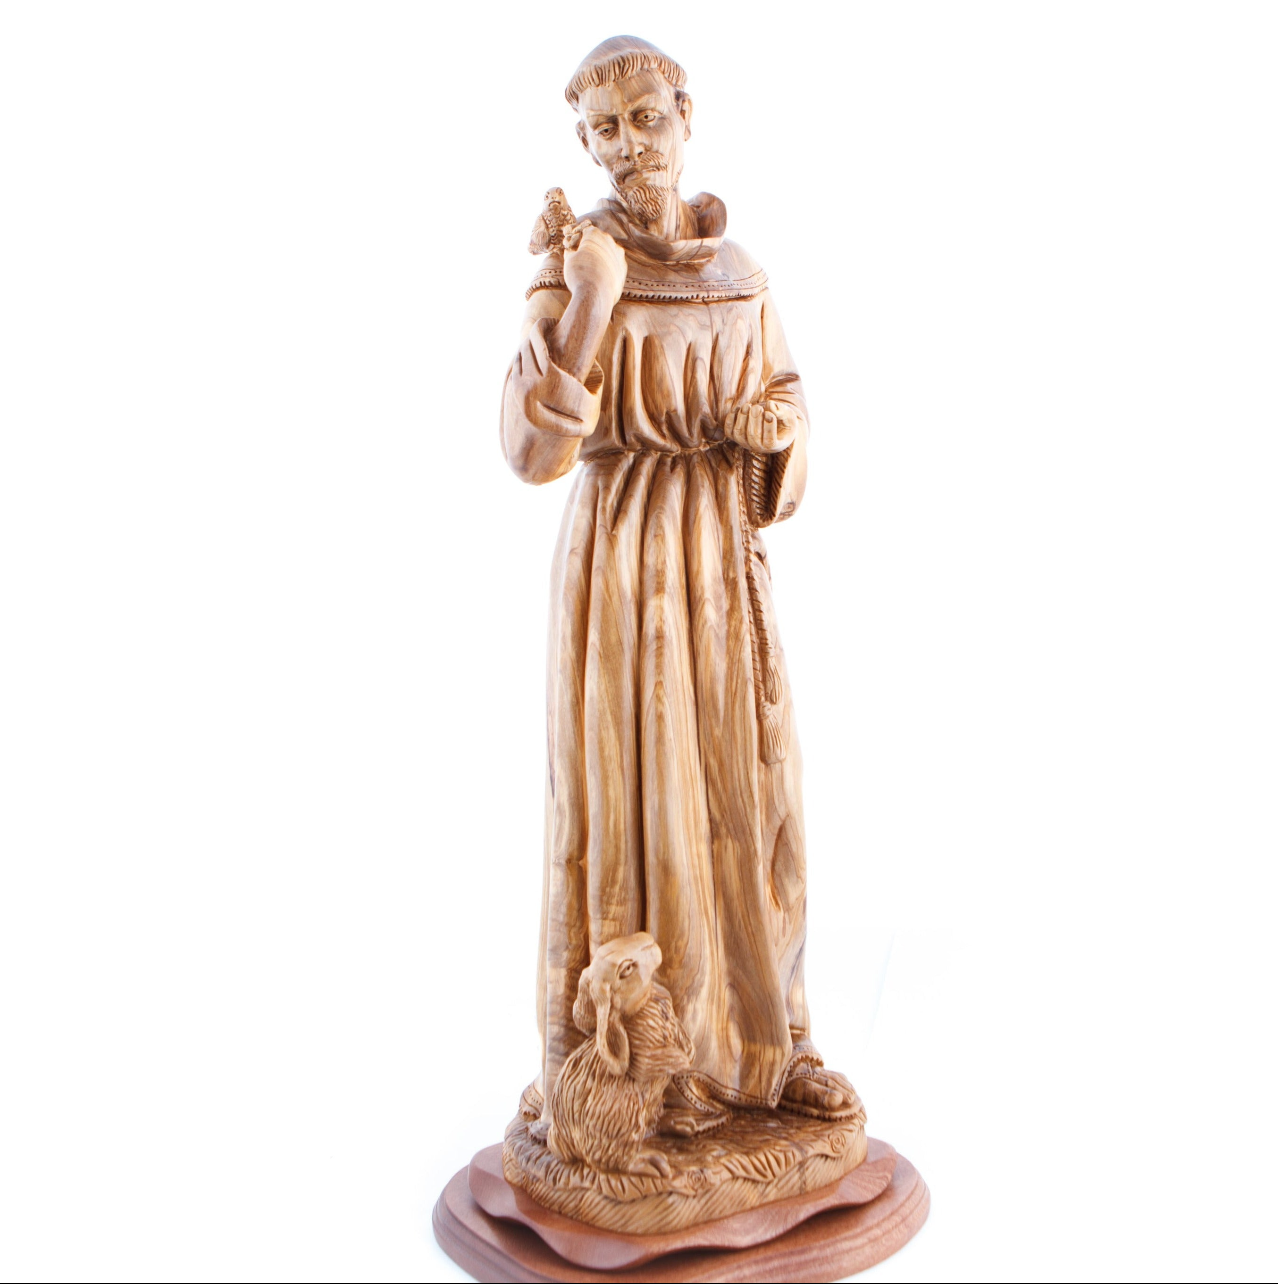 St. Francis of Assisi with Birds and Rabbit, 25 Inched Tall Masterpiece, Olive Wood Hand Sculptured in the Holy Land